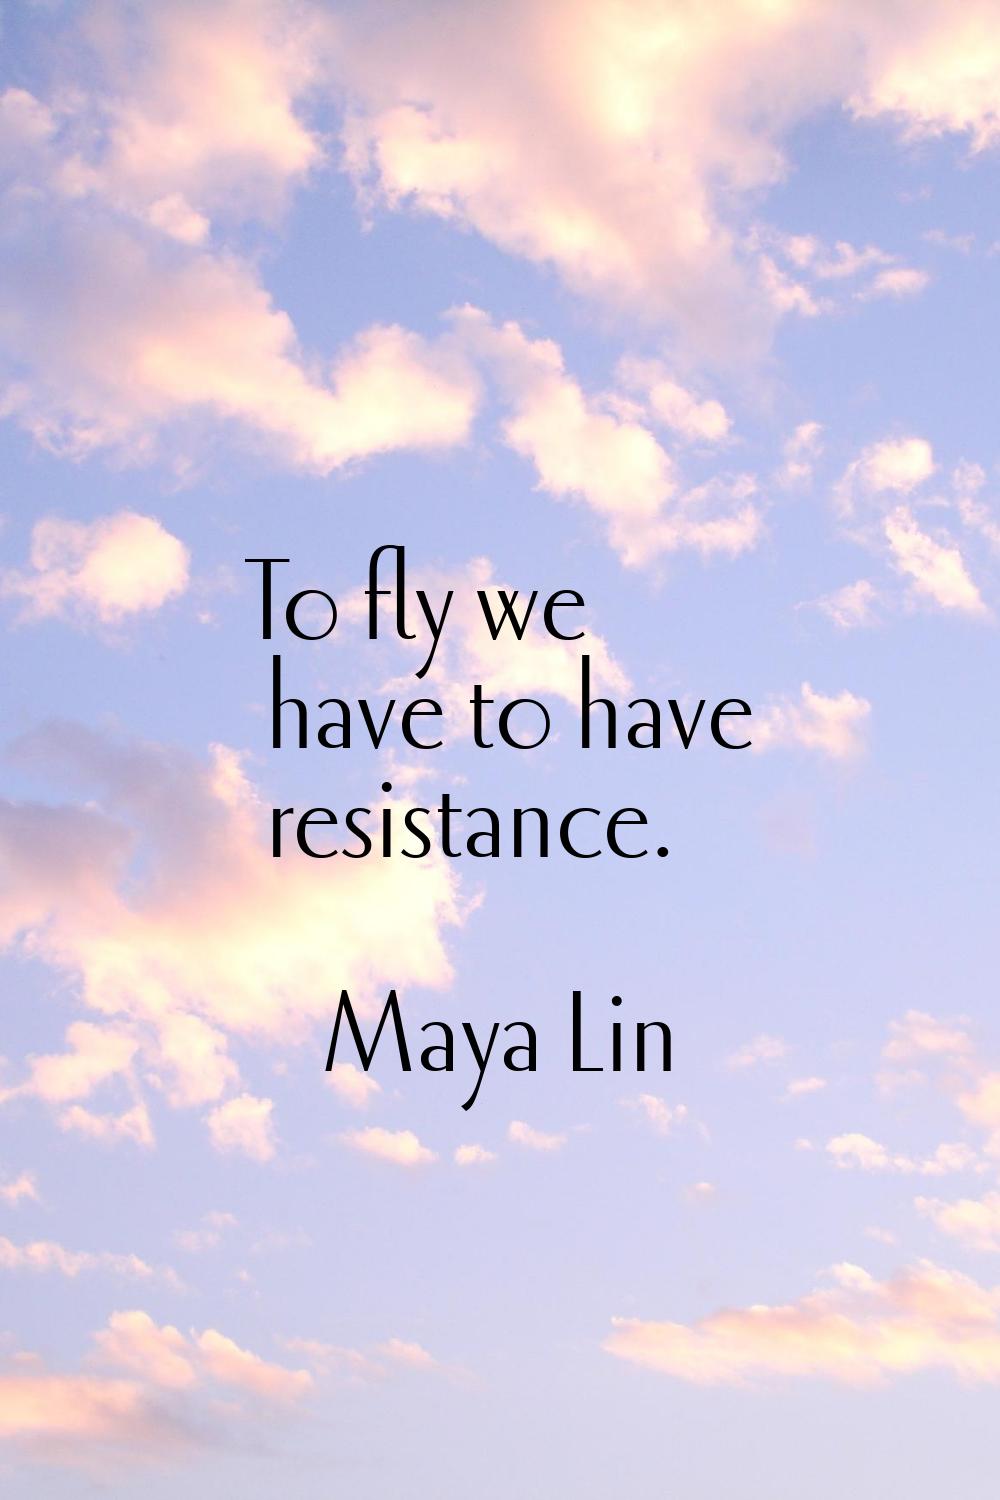 To fly we have to have resistance.